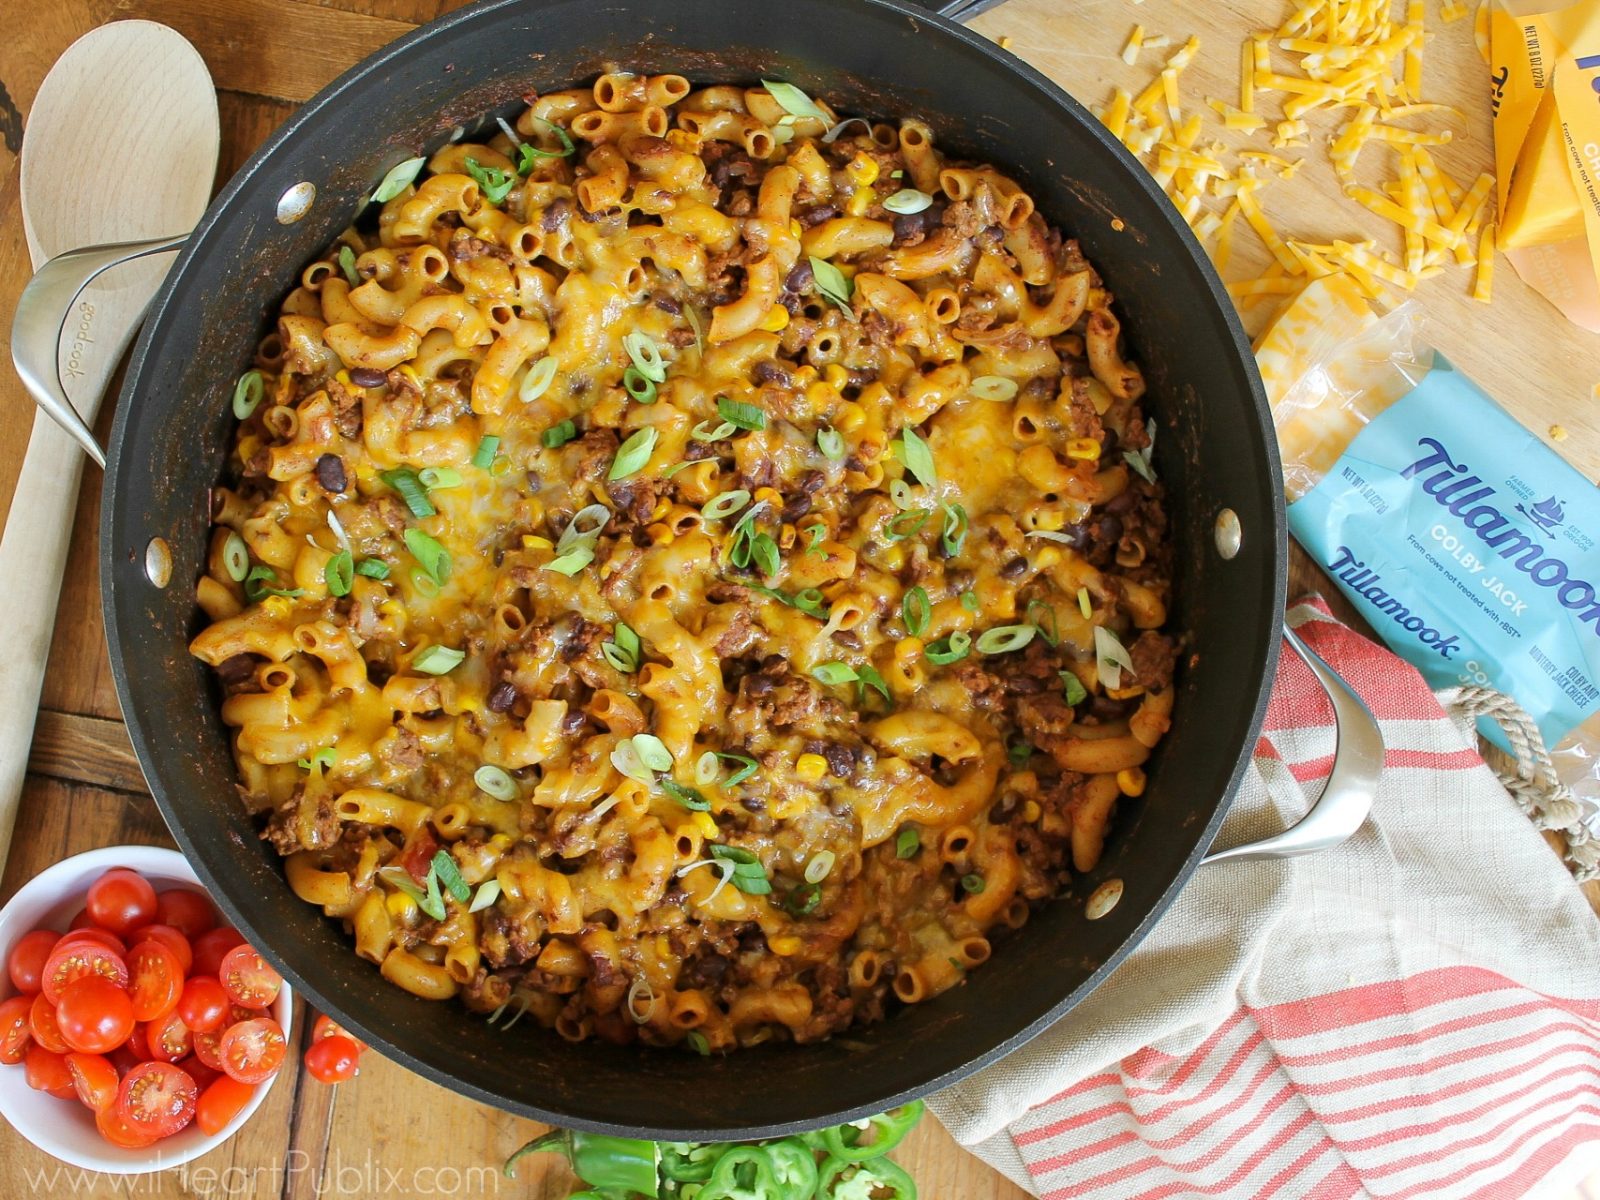 Skillet Taco Mac & Cheese – Fantastic Weeknight Recipe To Go With The Tillamook Cheese Coupon!